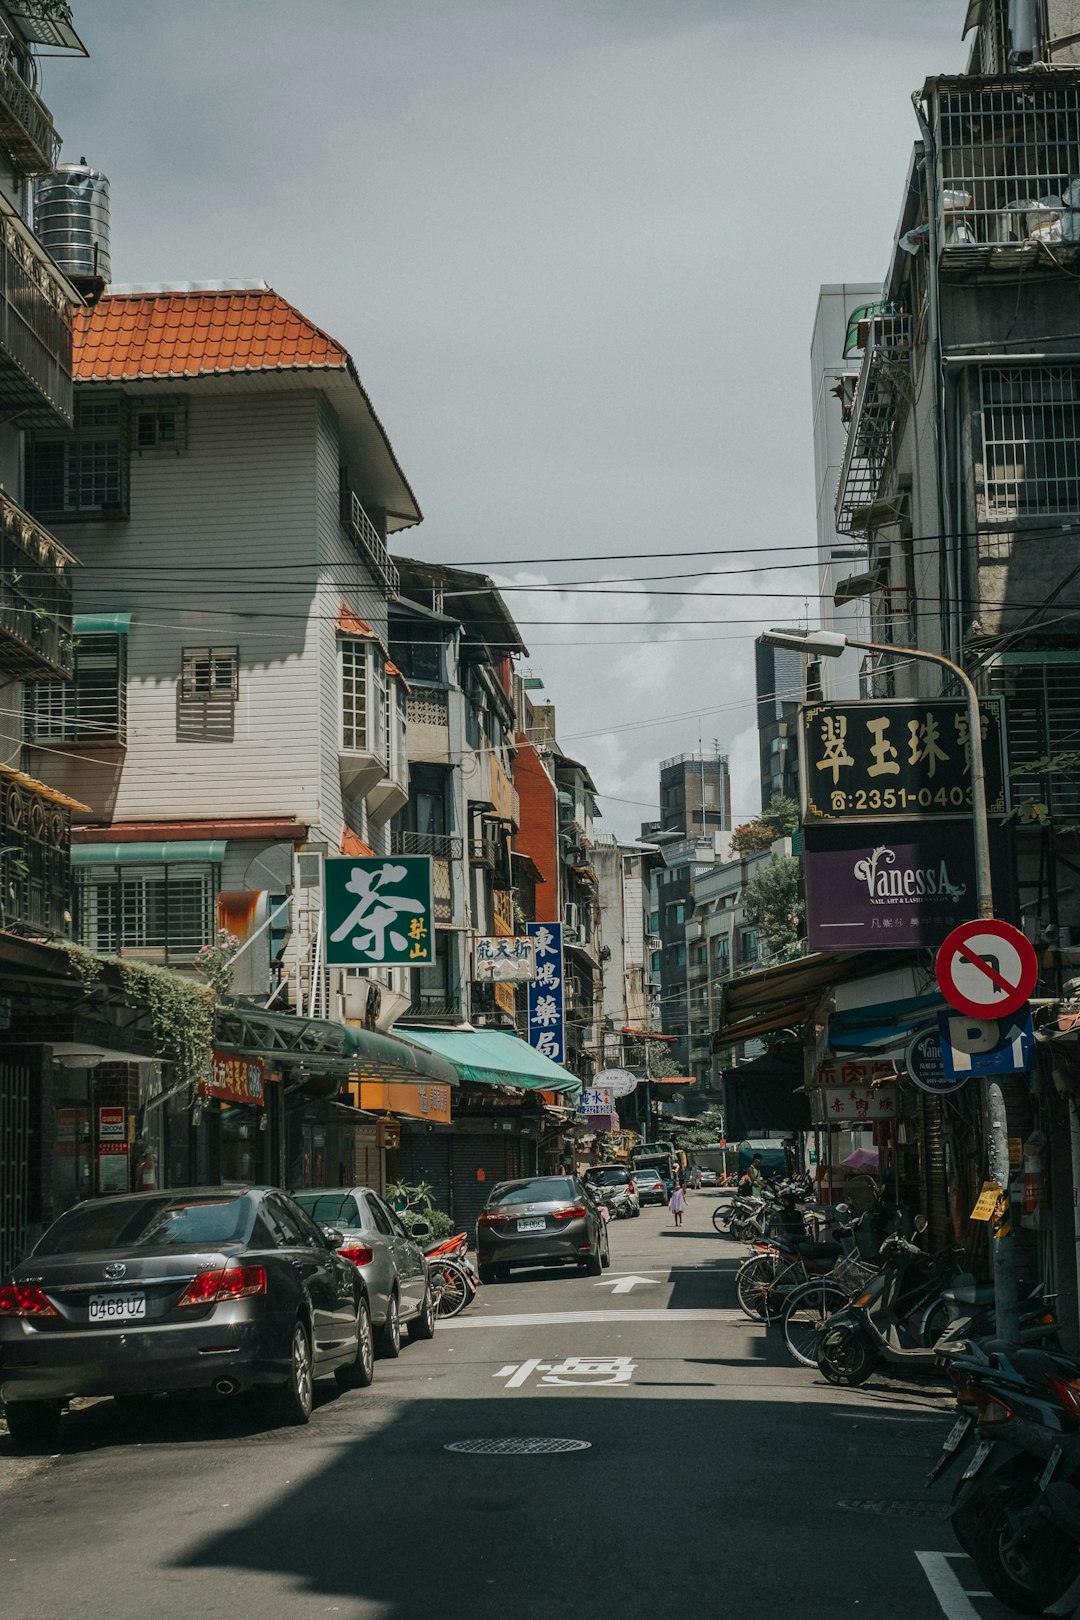 travelers stories about Town in Da’an District, Taiwan